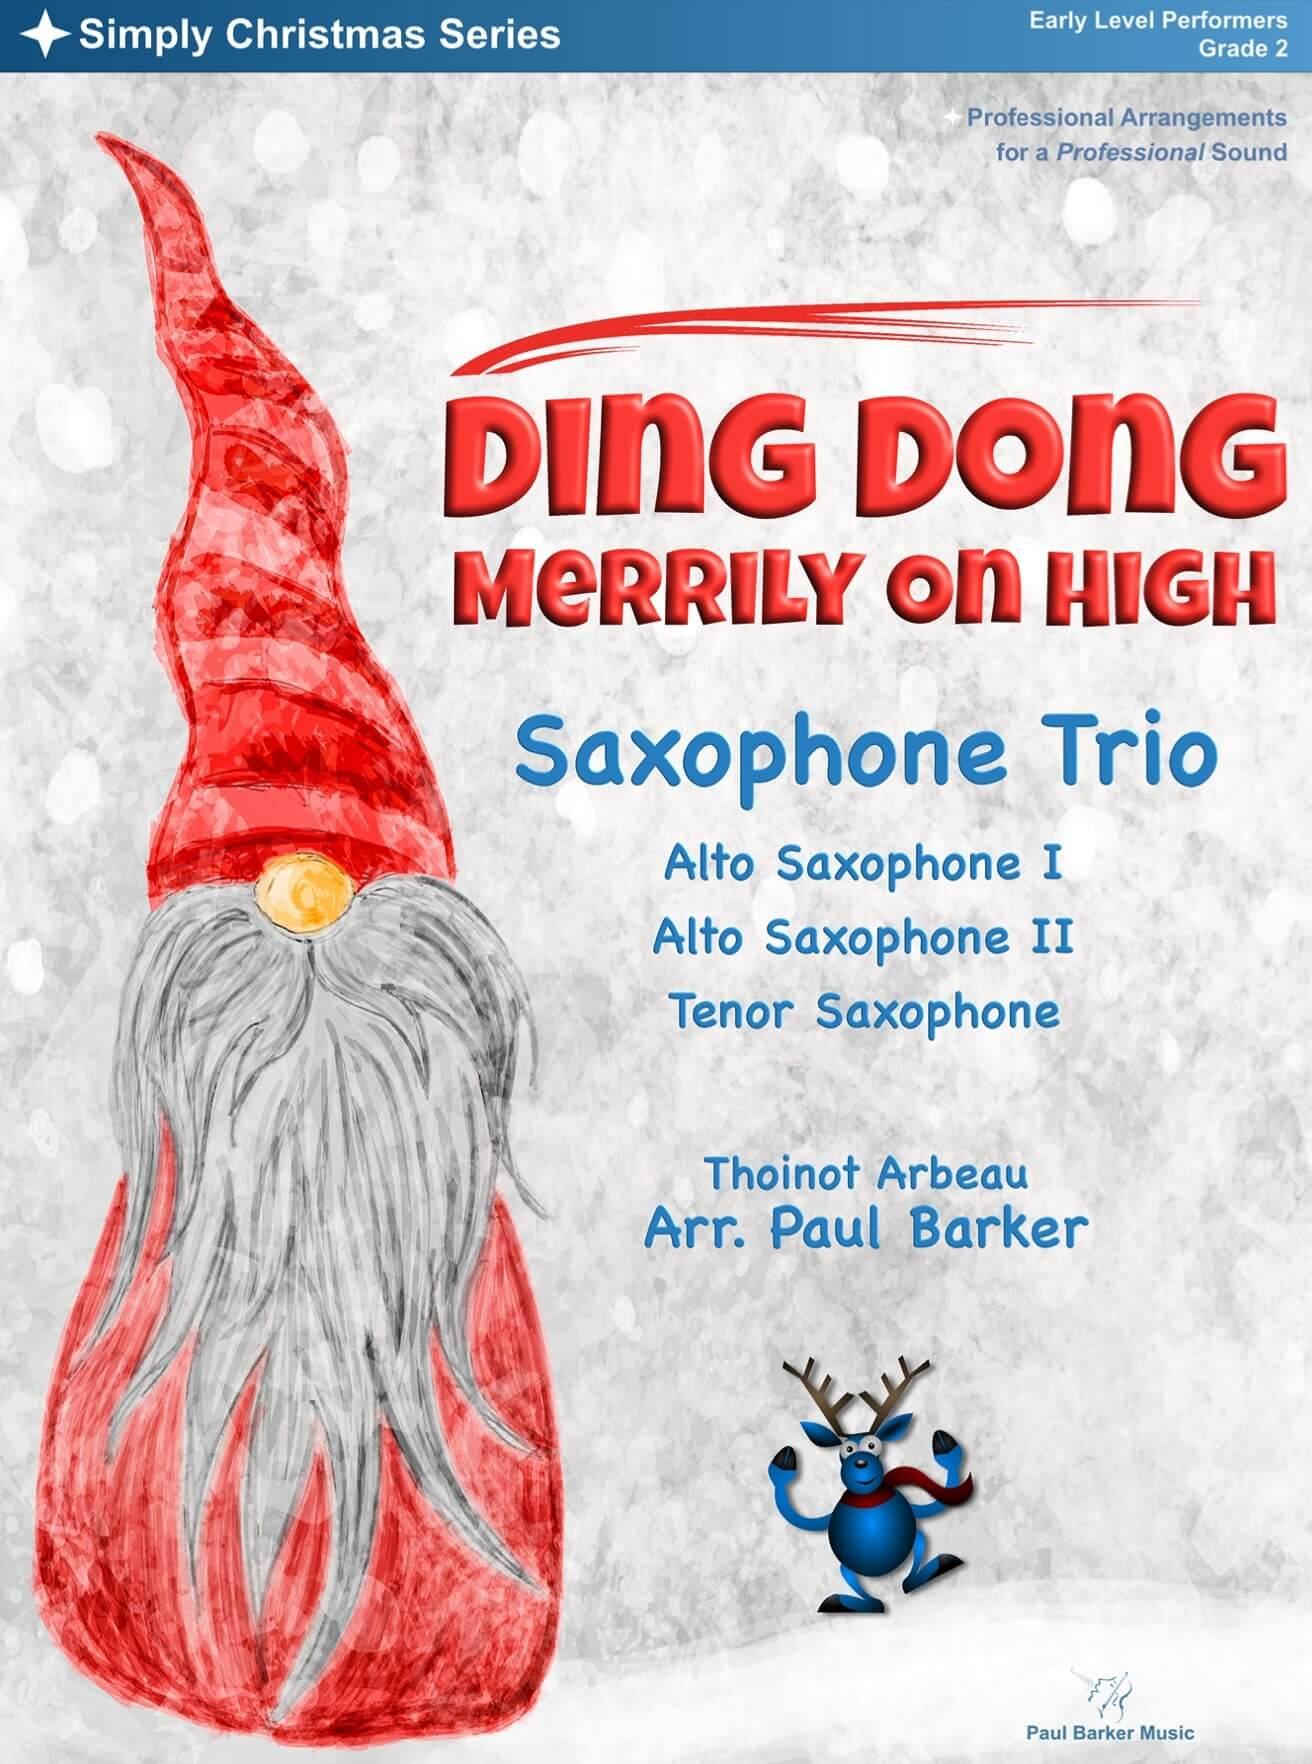 Ding Dong Merrily On High (Saxophone Trio) - Paul Barker Music 